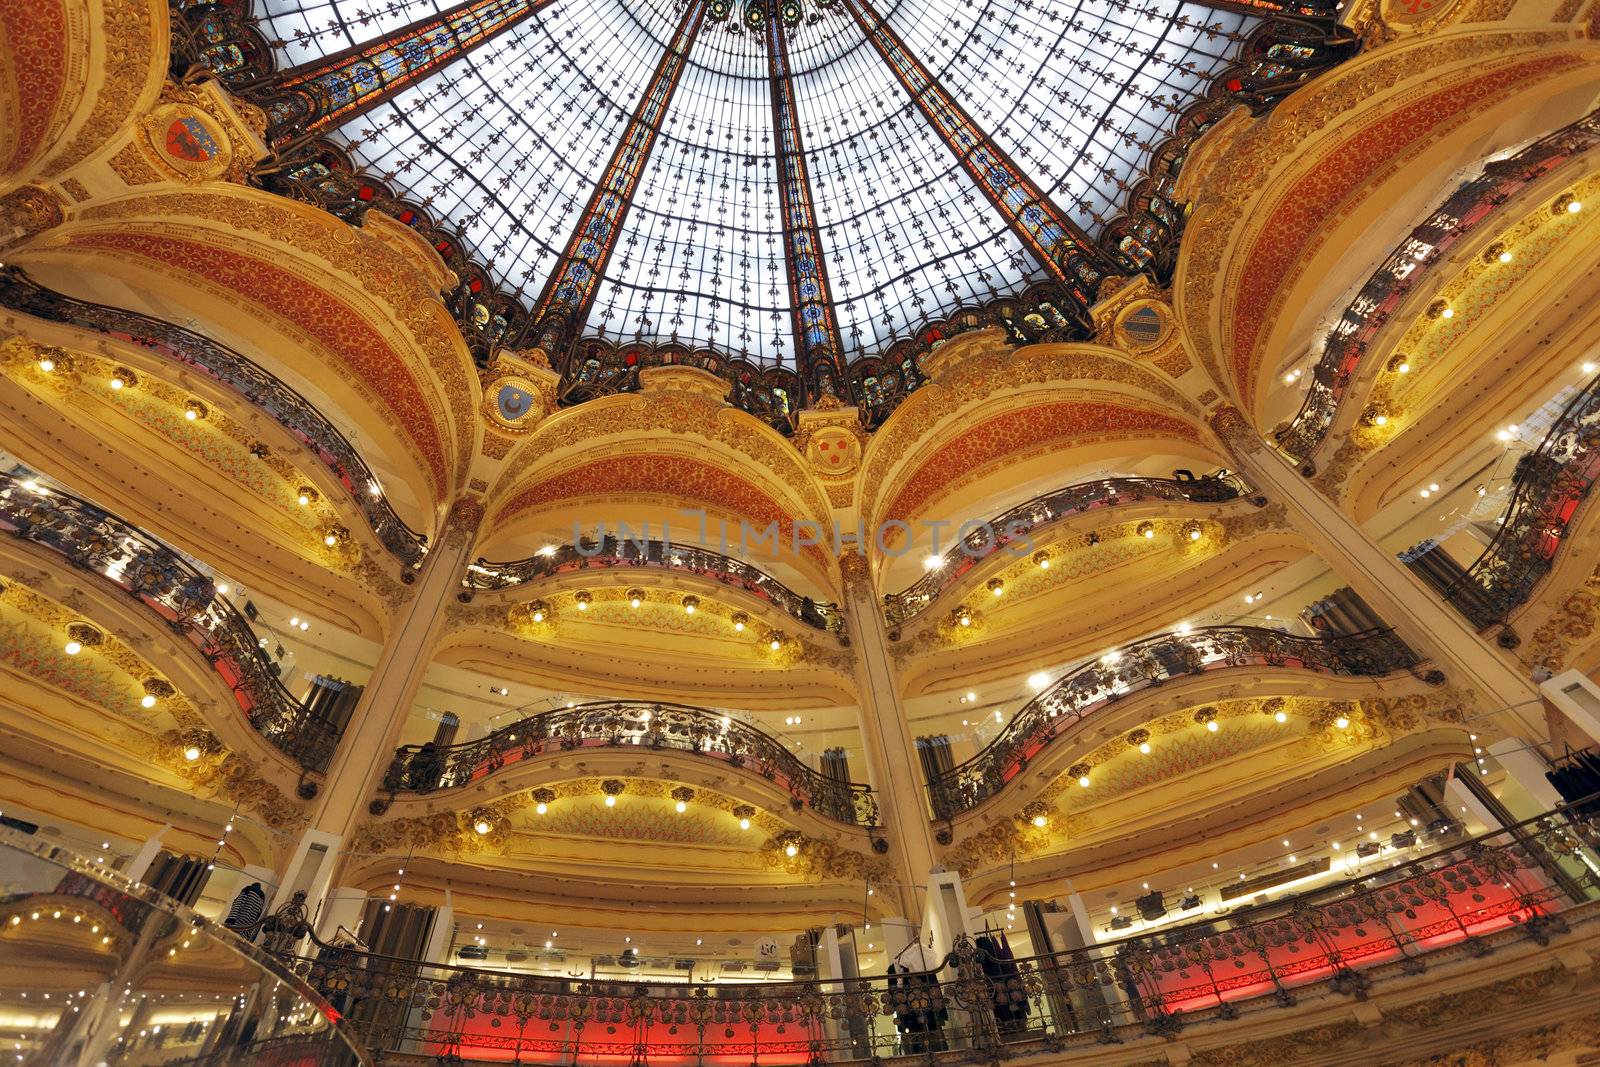 PARIS, FRANCE - MAY 17: Interior of Galeries Lafayette department store May 17, 2010 in Paris, France